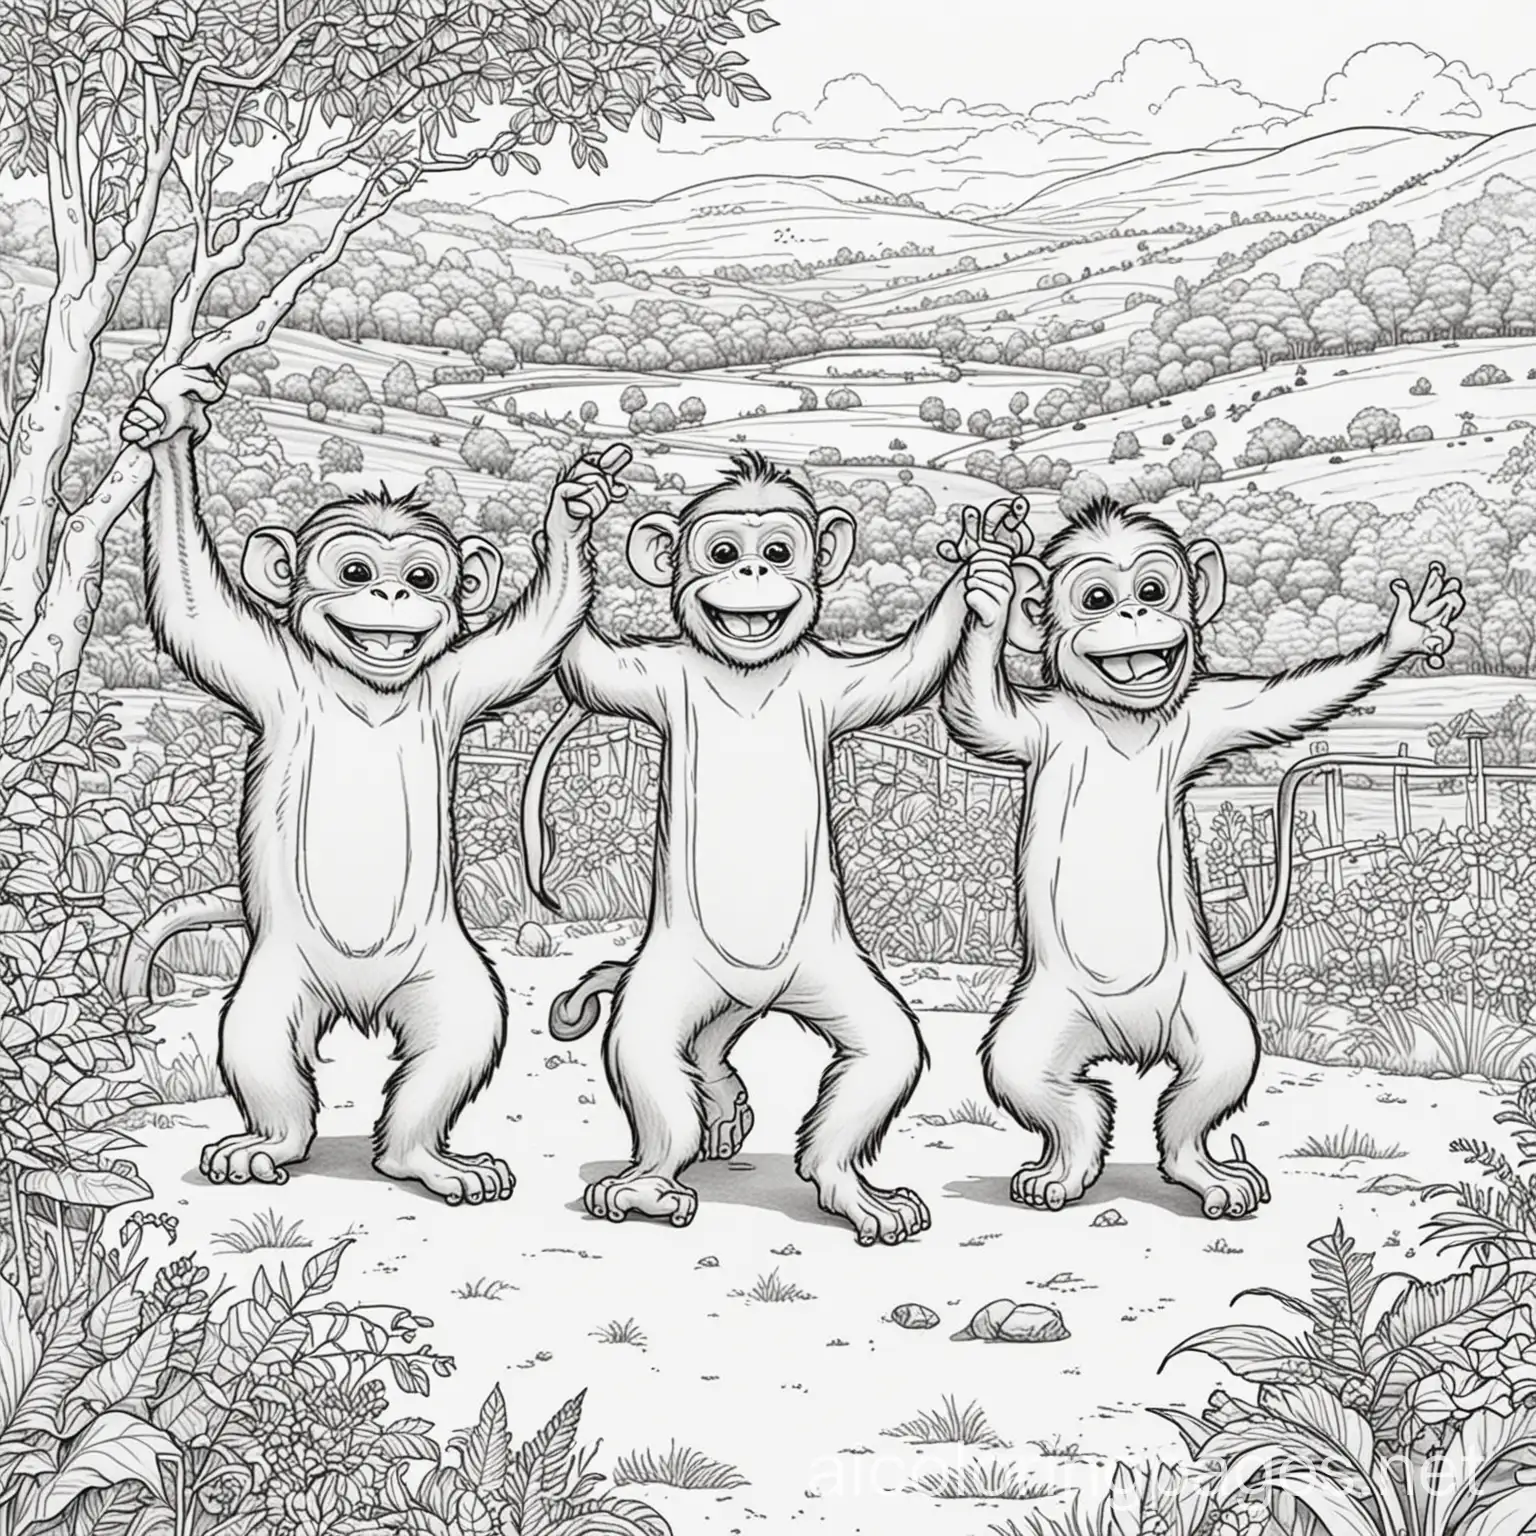 Create a cartoonish picture of  
cartoon  monkeys  dancing in a party   in the English countryside, Coloring Page, black and white, line art, white background, Simplicity, Ample White Space. The background of the coloring page is plain white to make it easy for young children to color within the lines. The outlines of all the subjects are easy to distinguish, making it simple for kids to color without too much difficulty